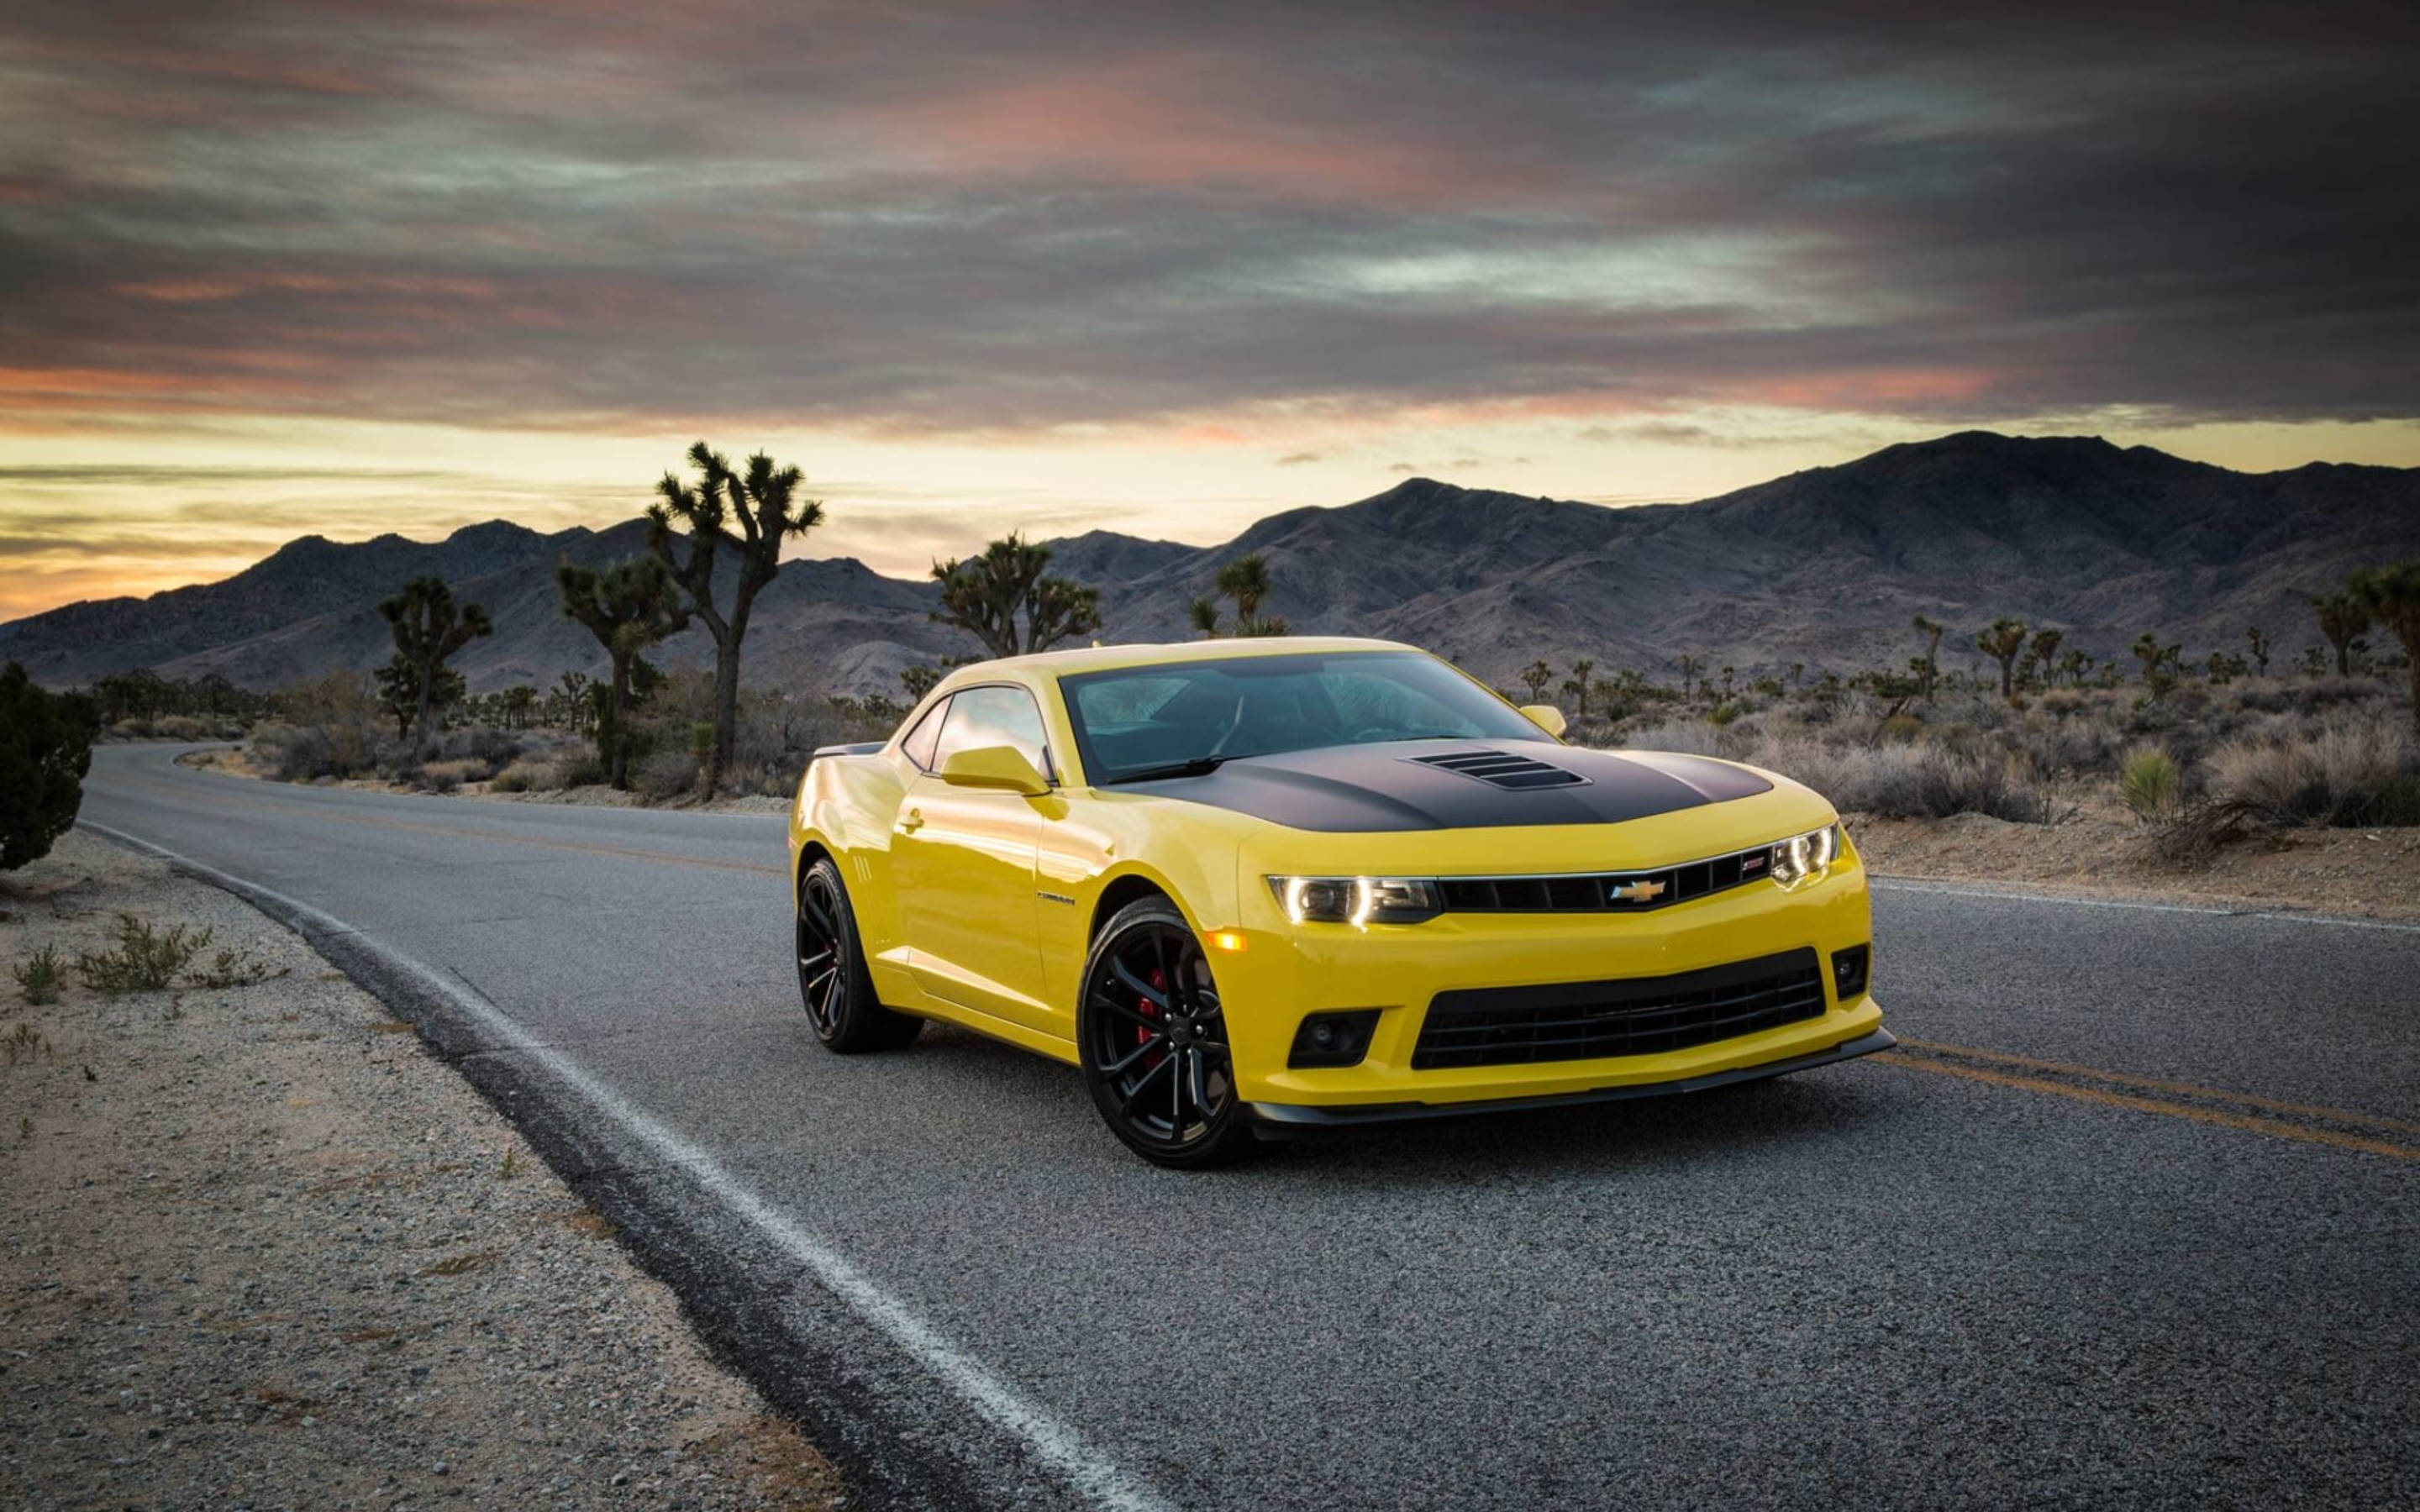 Camaro Muscle Cars Feature Photo Wallpaper